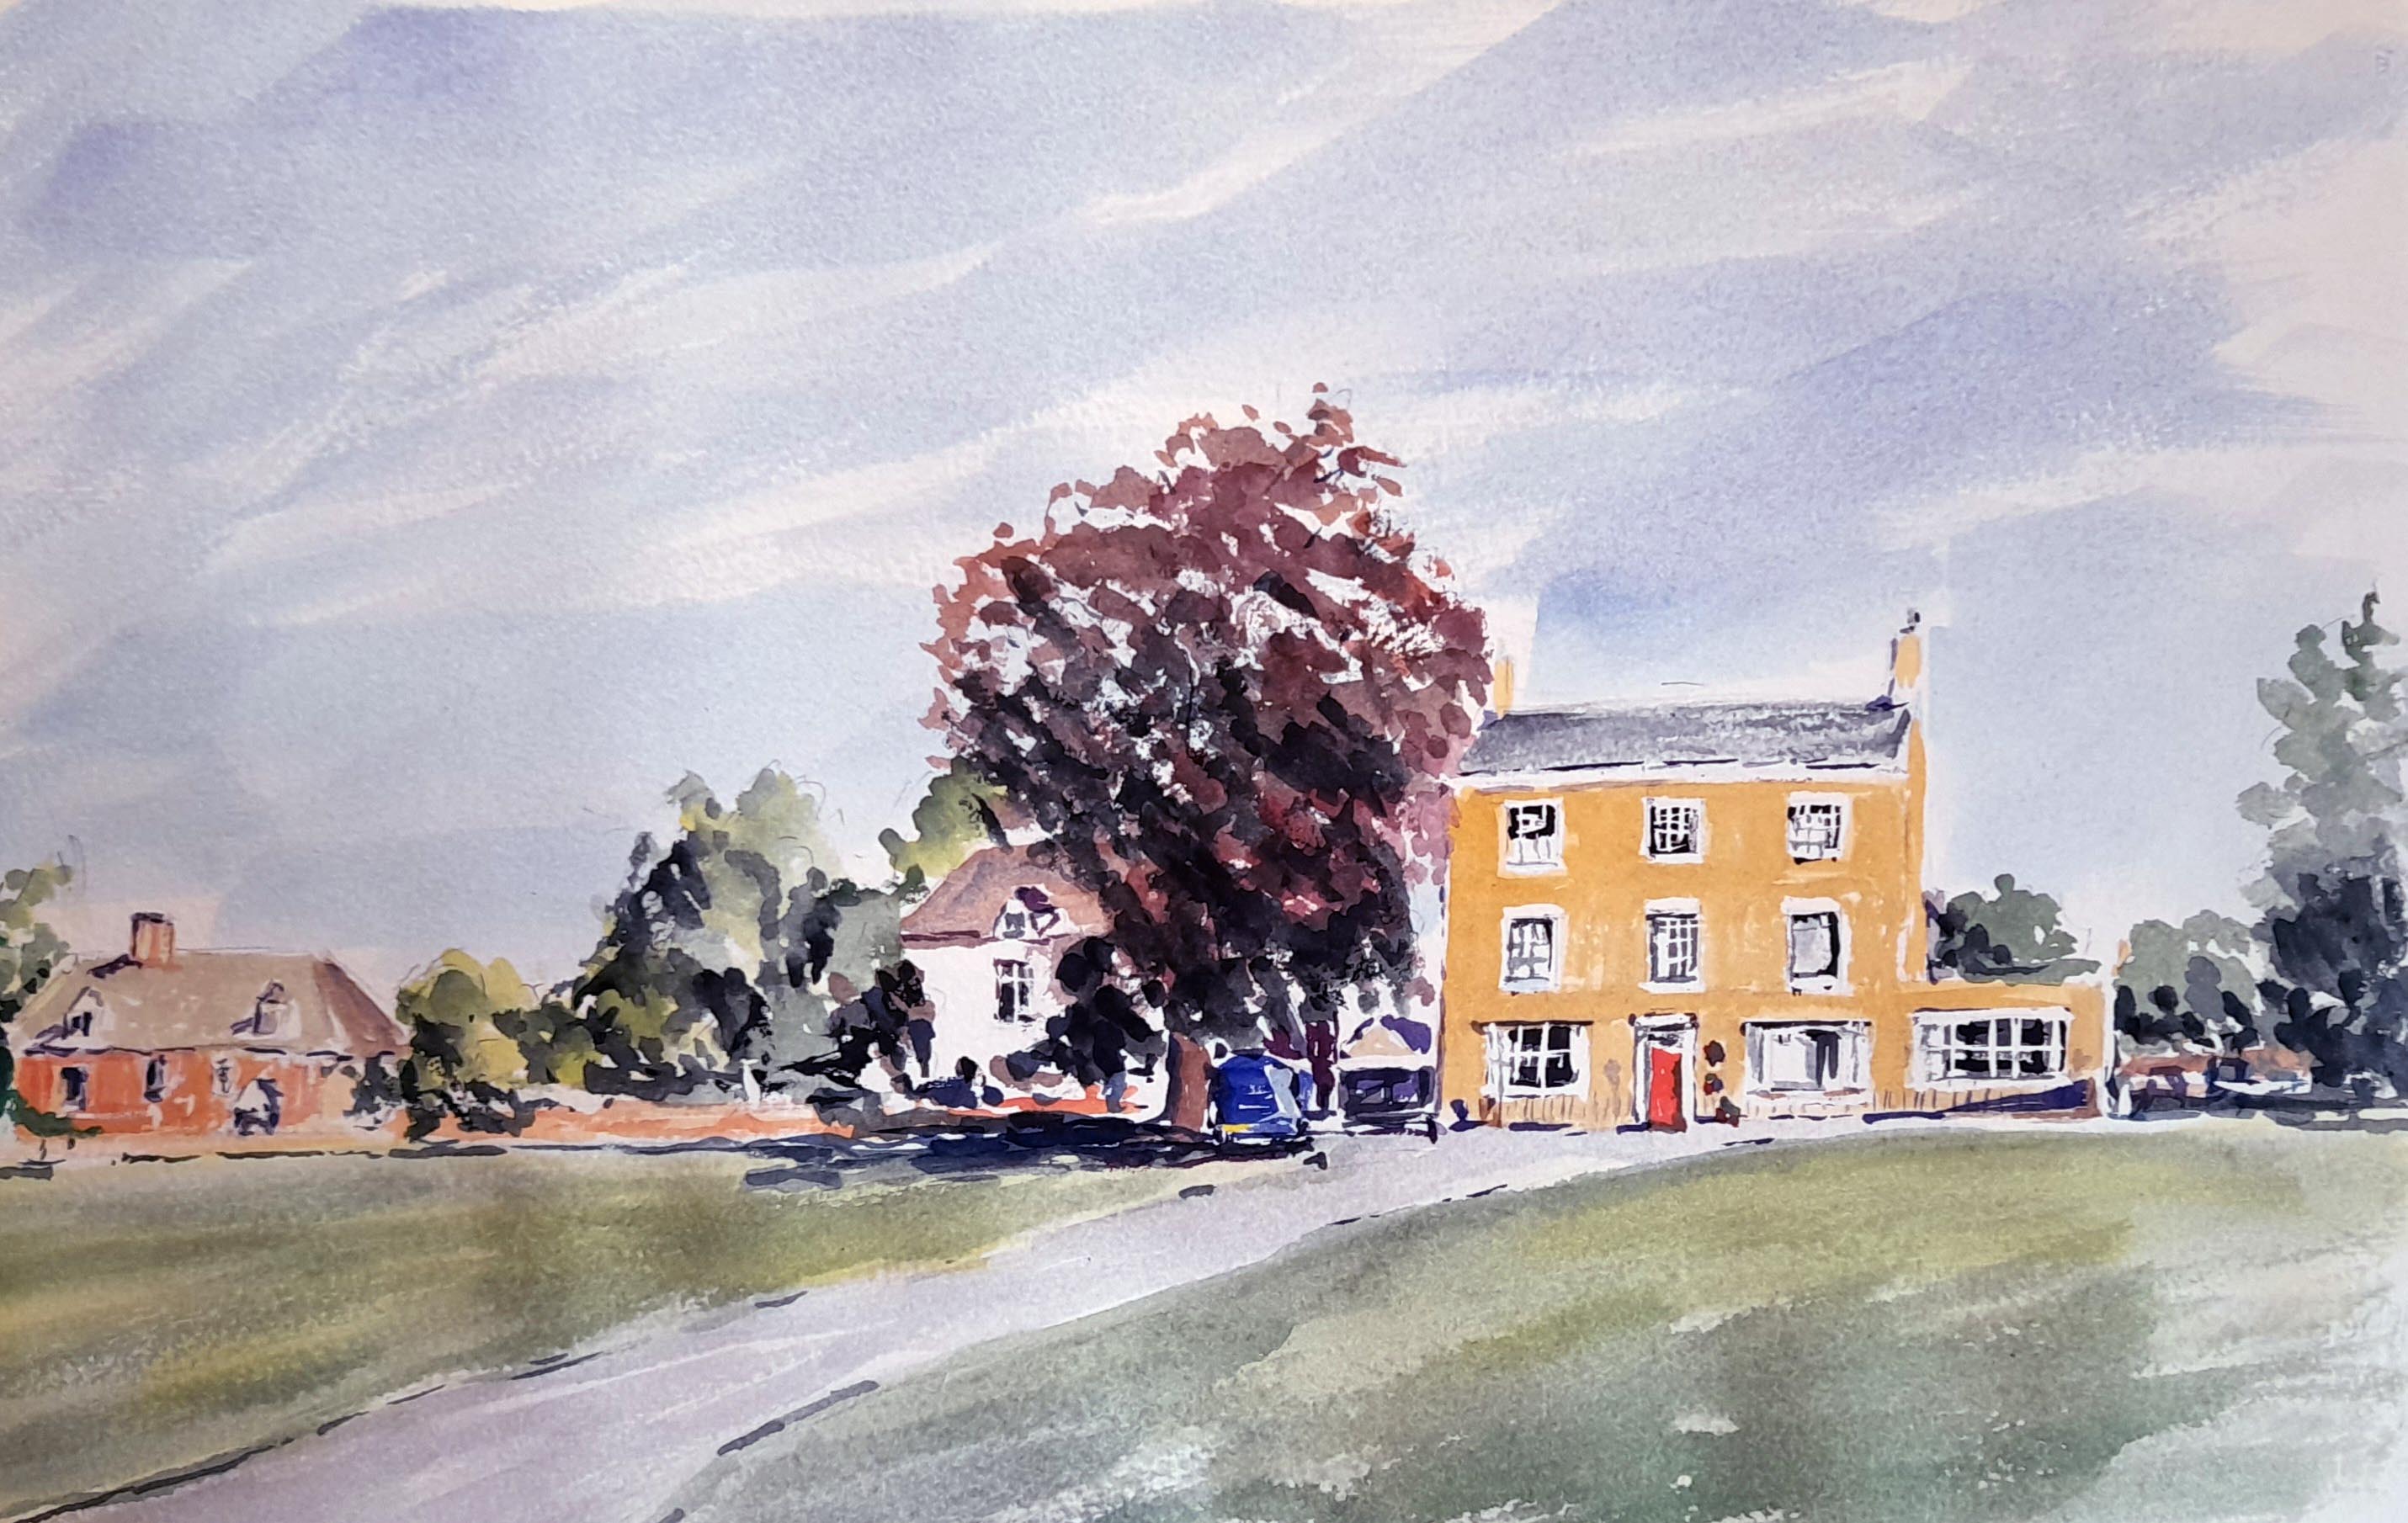 Frampton on Severn, Gloucestershire, watercolour painting, for sale, commission a painting, buy painting, Gloucestershire, river Severn, gift, buy a painting of,